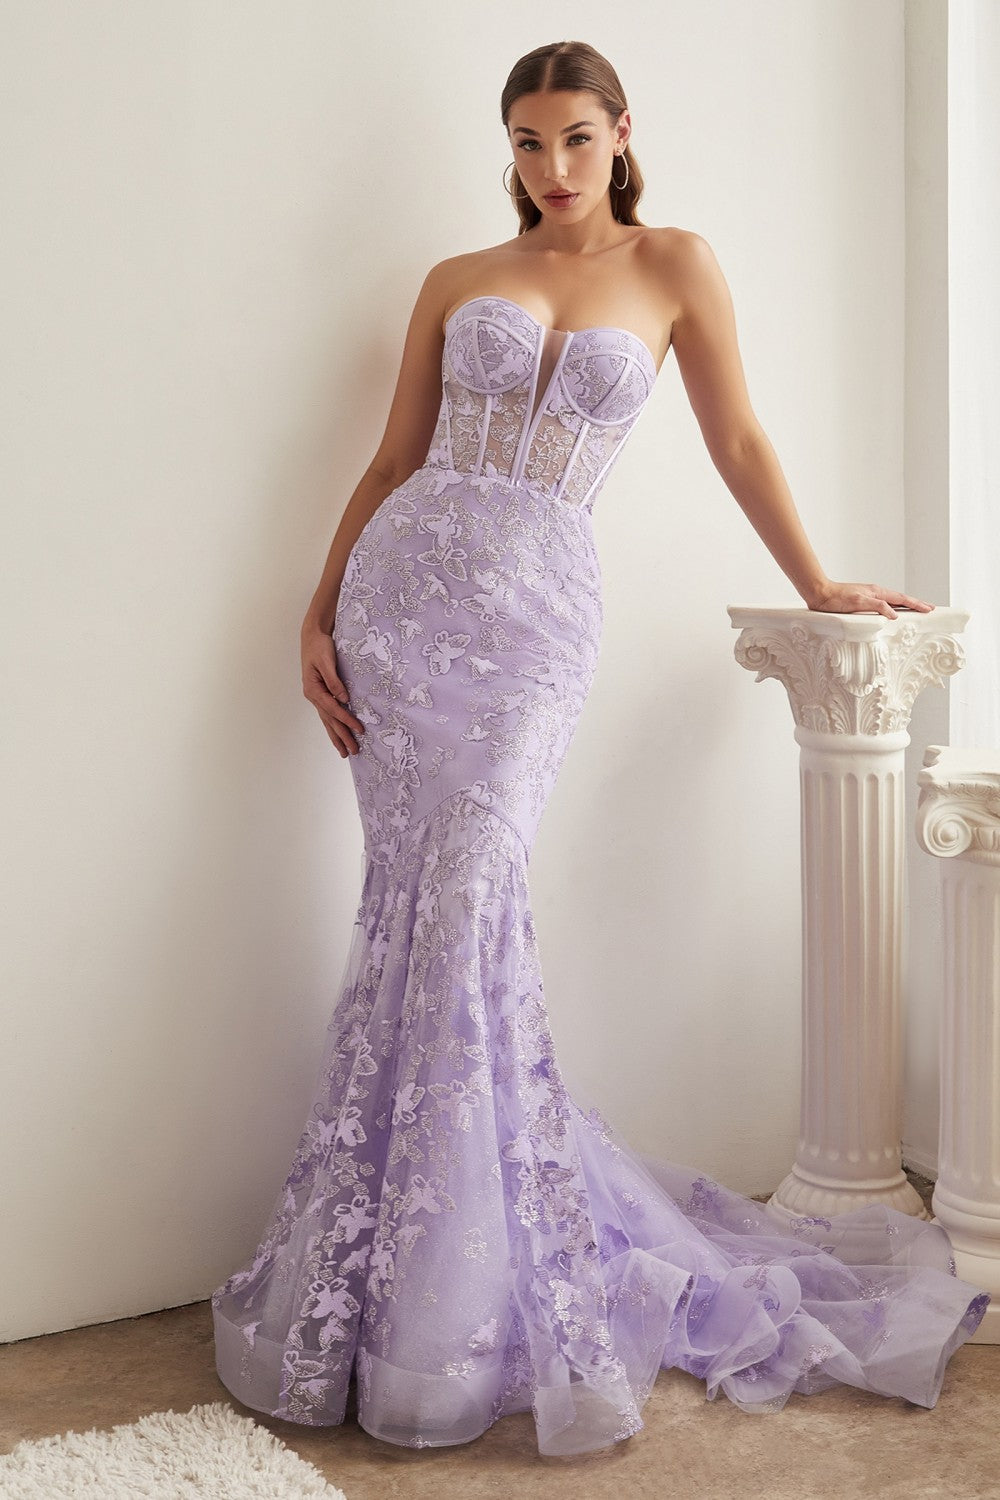 Lavender Strapless Butterfly Mermaid Gown CB099 - Women Evening Formal Gown - Special Occasion